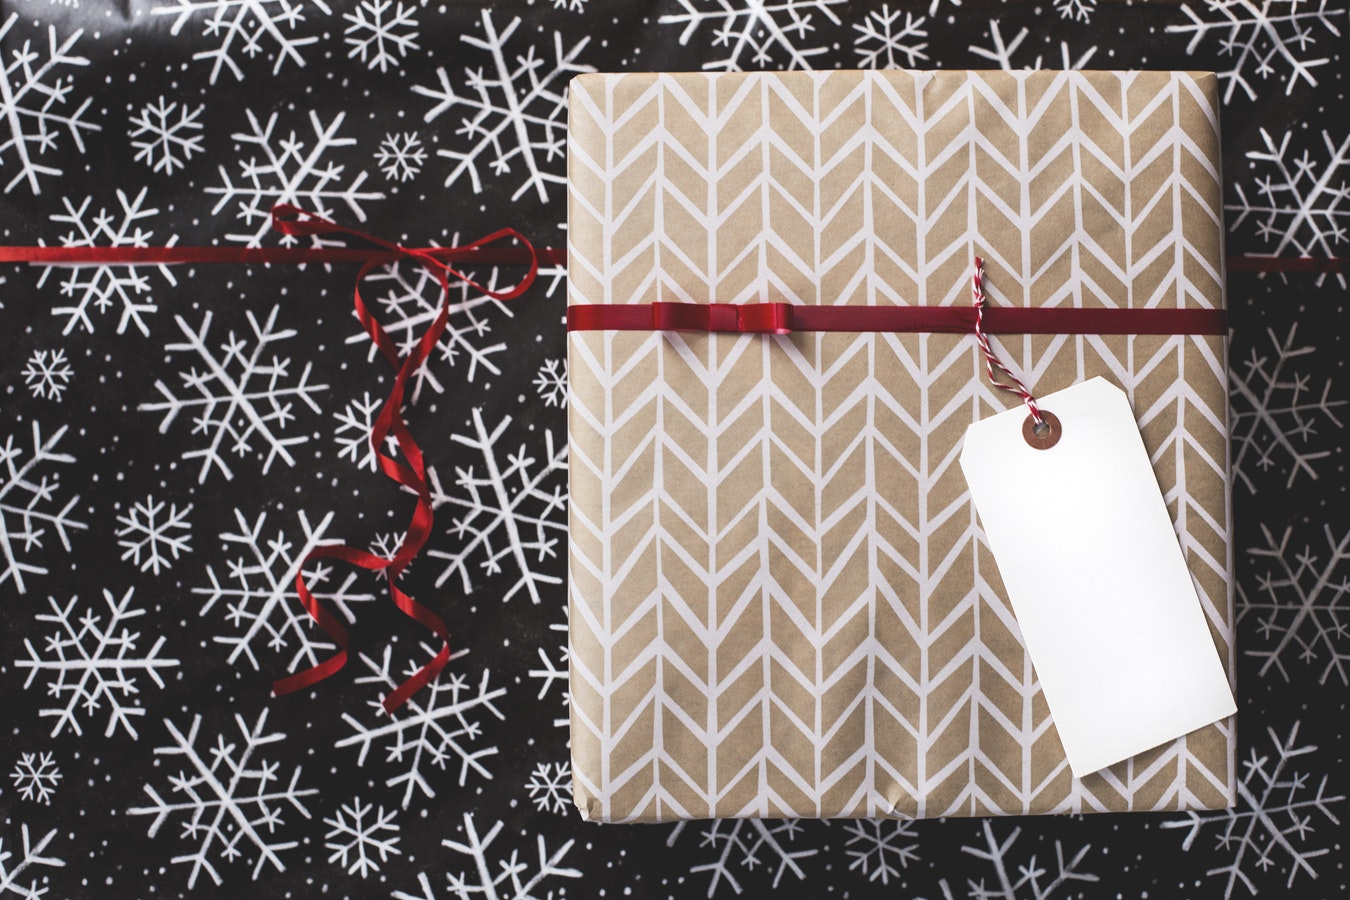 When you've gotten that perfect present for your loved one, next challenge is gift wrapping. Pic: Unsplash.com